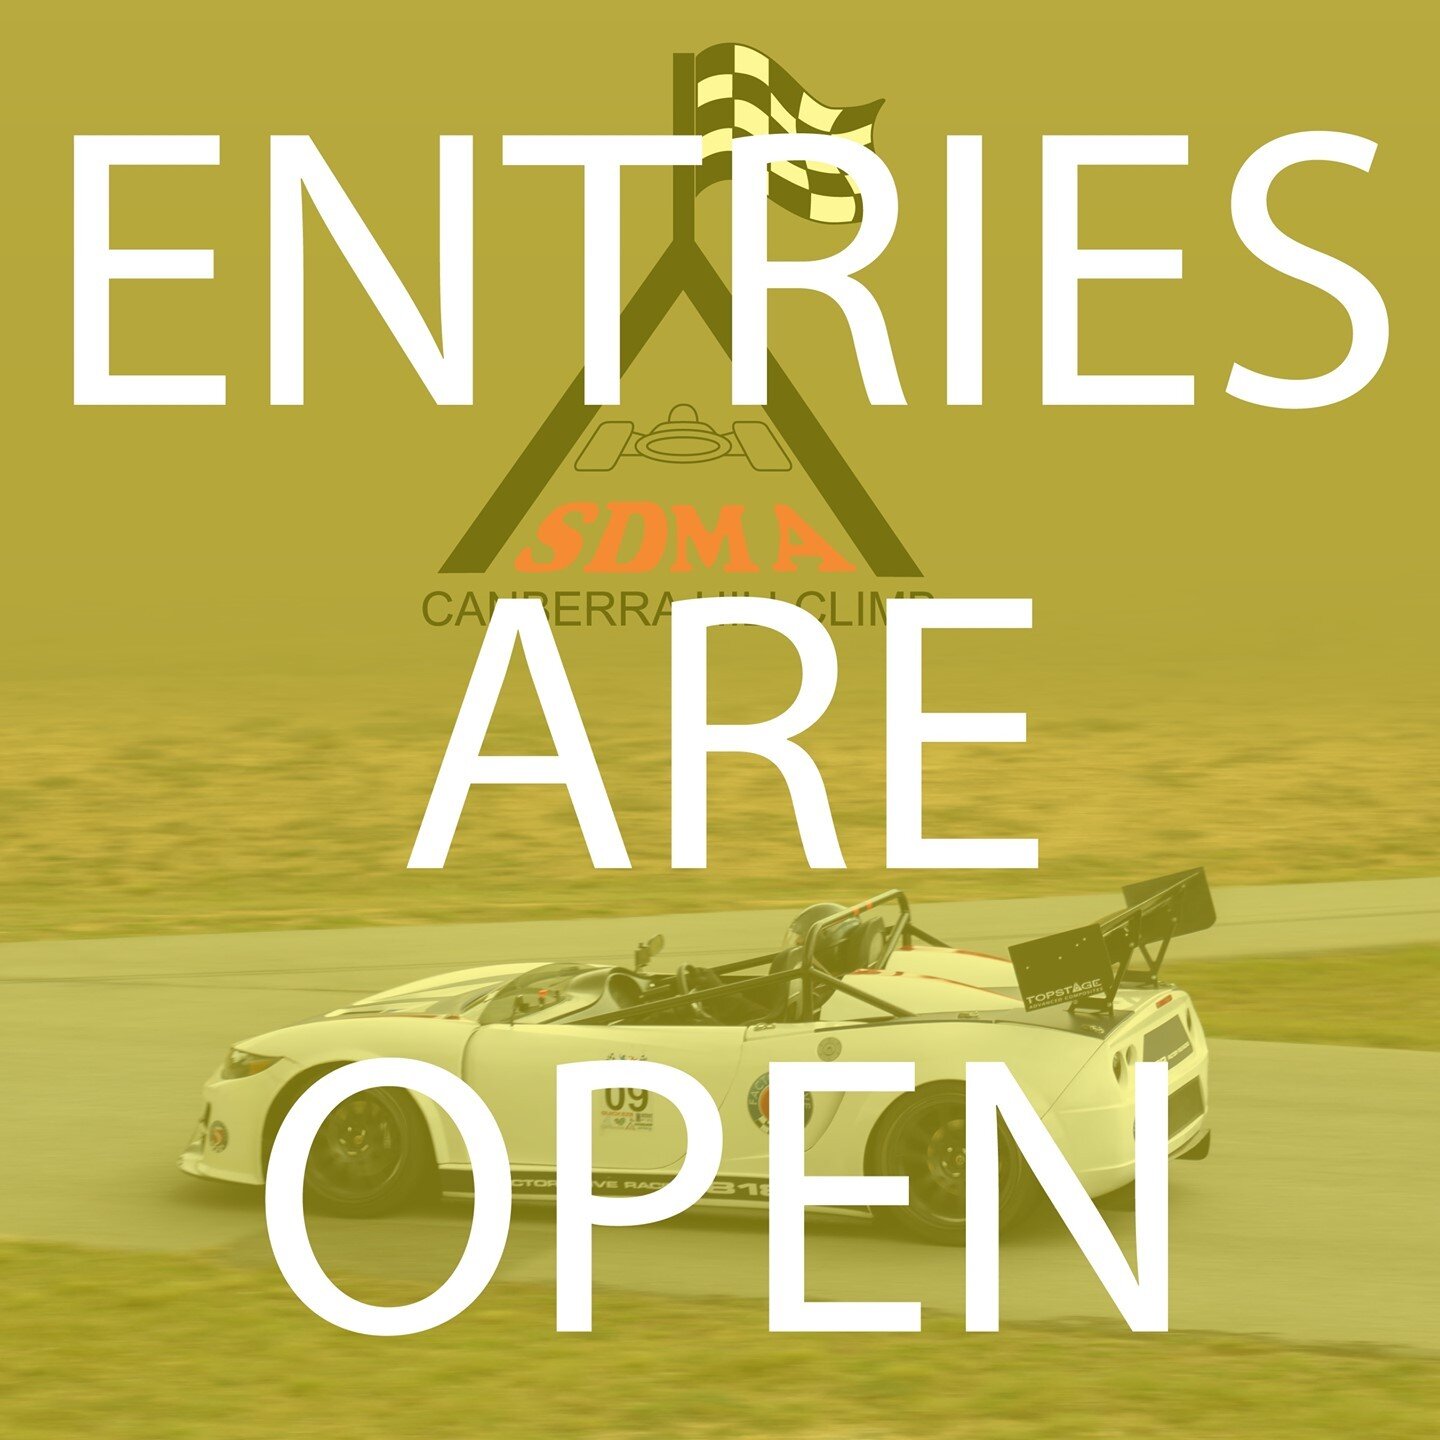 Entries are open for the one lap hillclimb on Sunday 7 March 2021.

Entry is open to all club members unless:
&bull; You live in one of the 11 New South Wales  Local Government Areas (LGAs) designated by the ACT Government as COVID affected areas;
Th